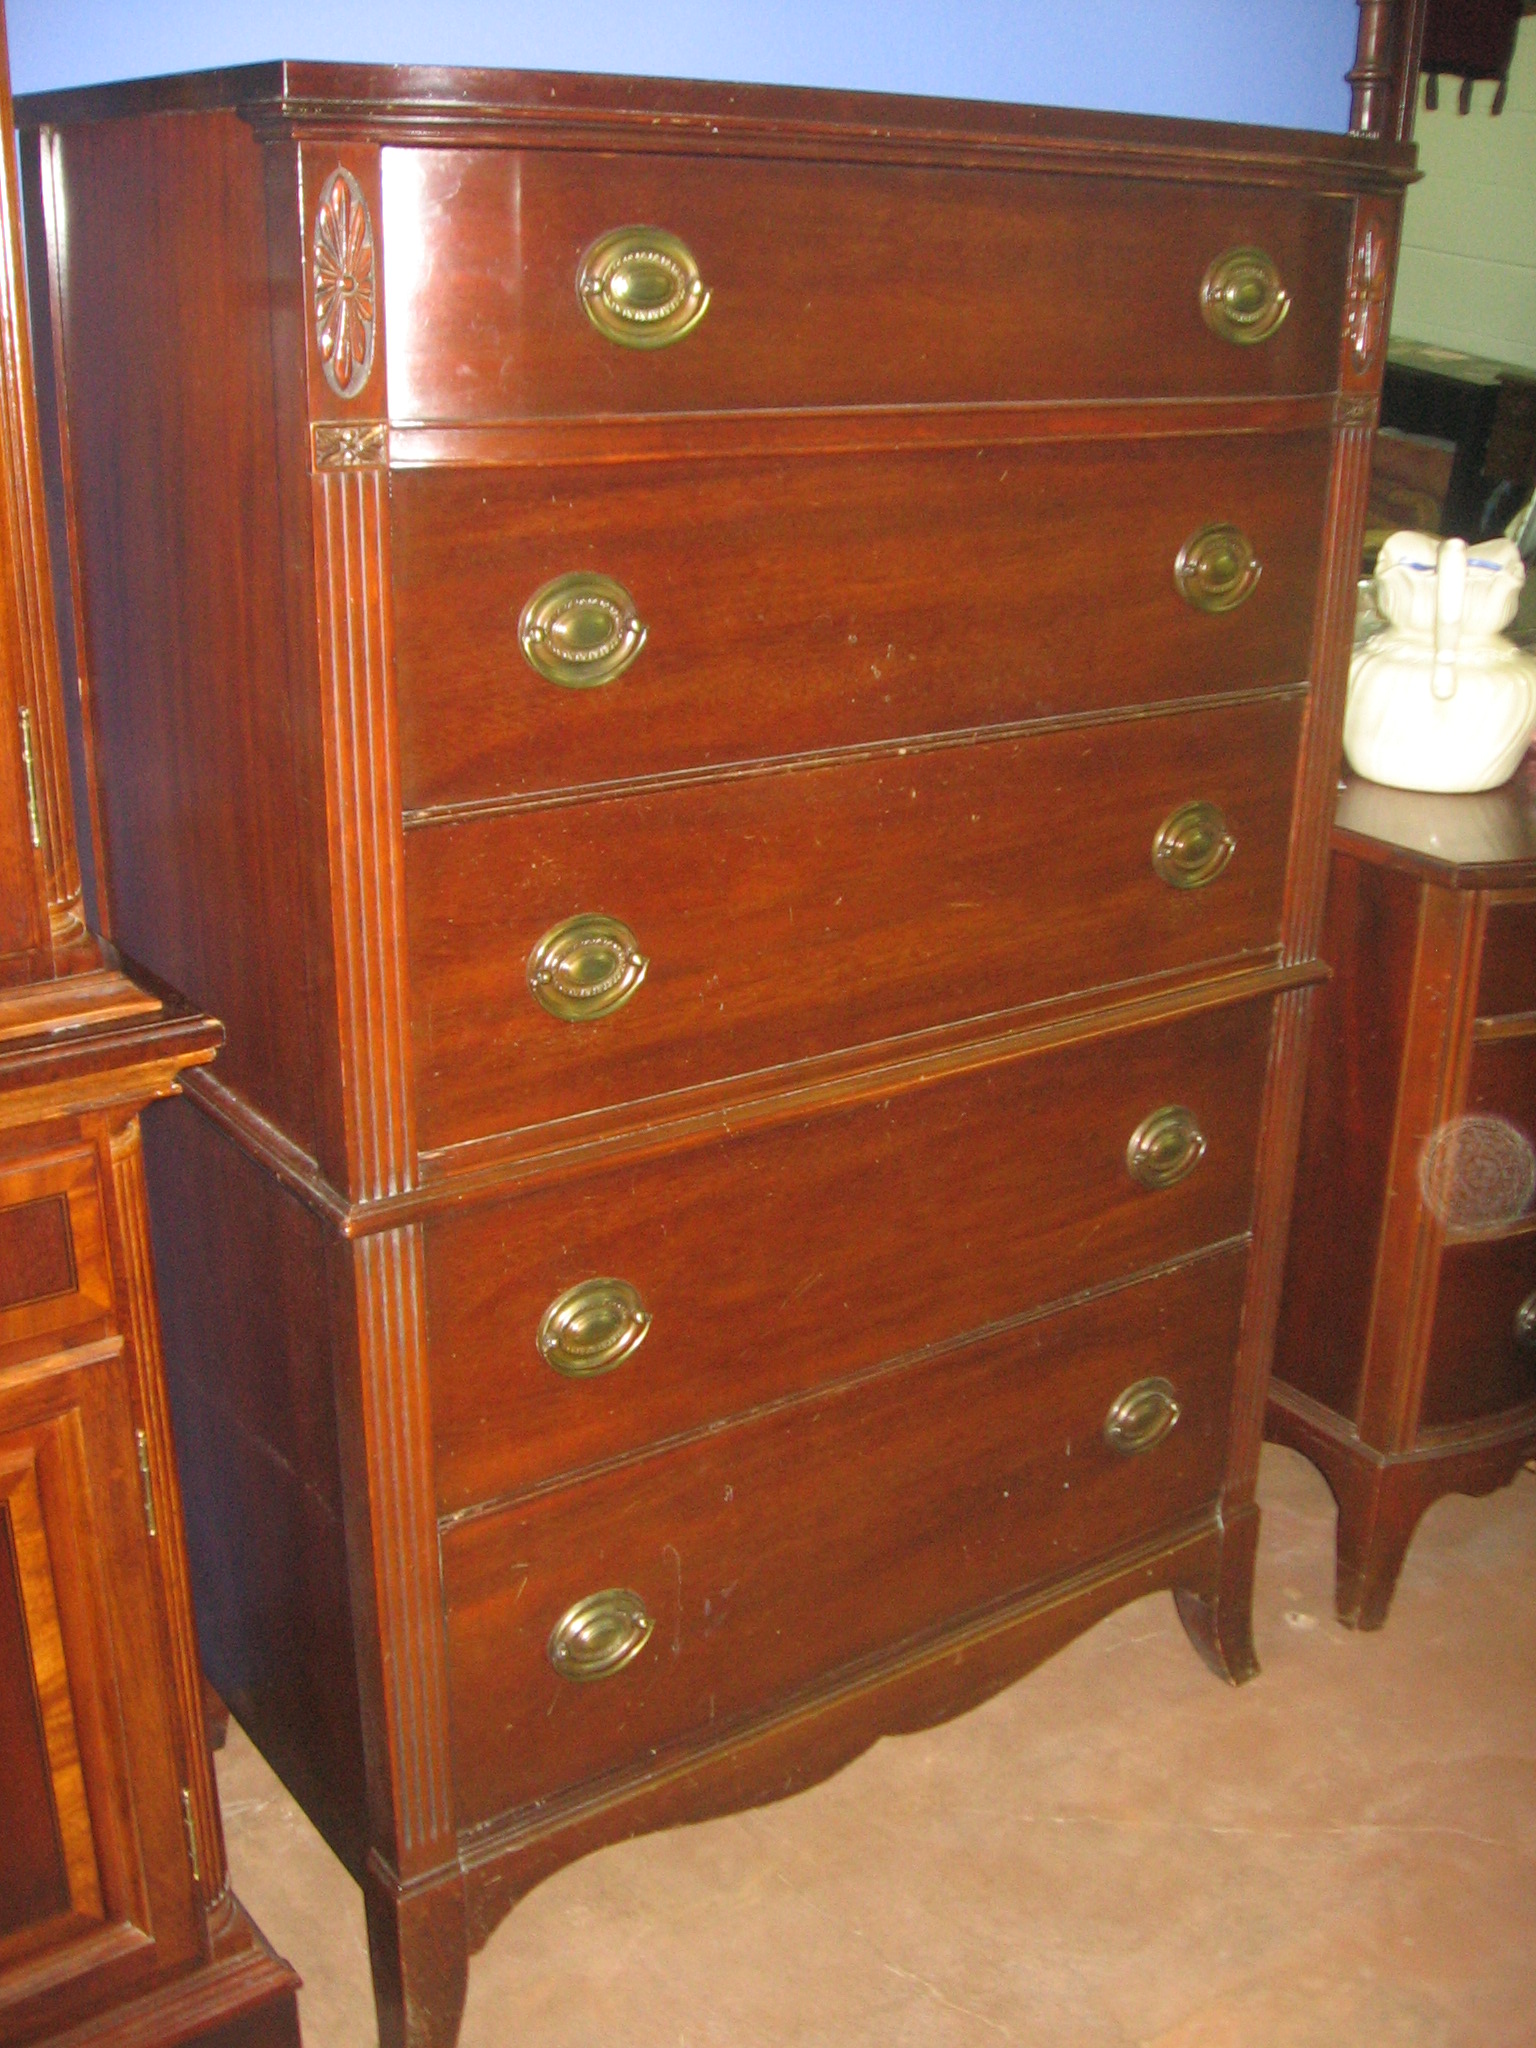 two brown chests a dresser and a brown carpet